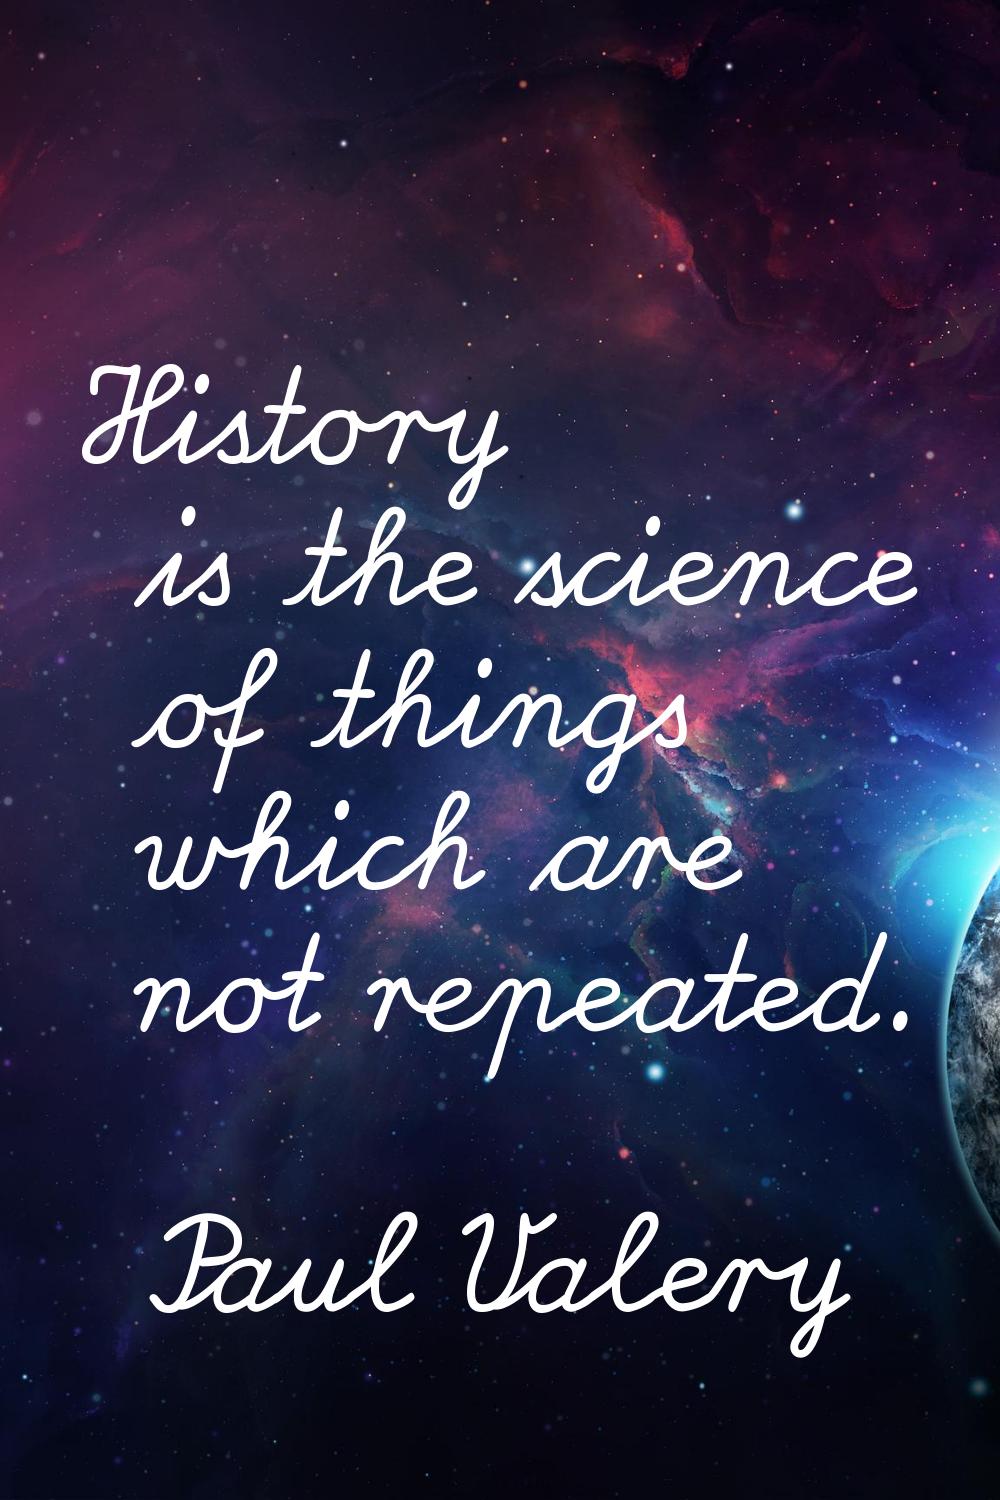 History is the science of things which are not repeated.